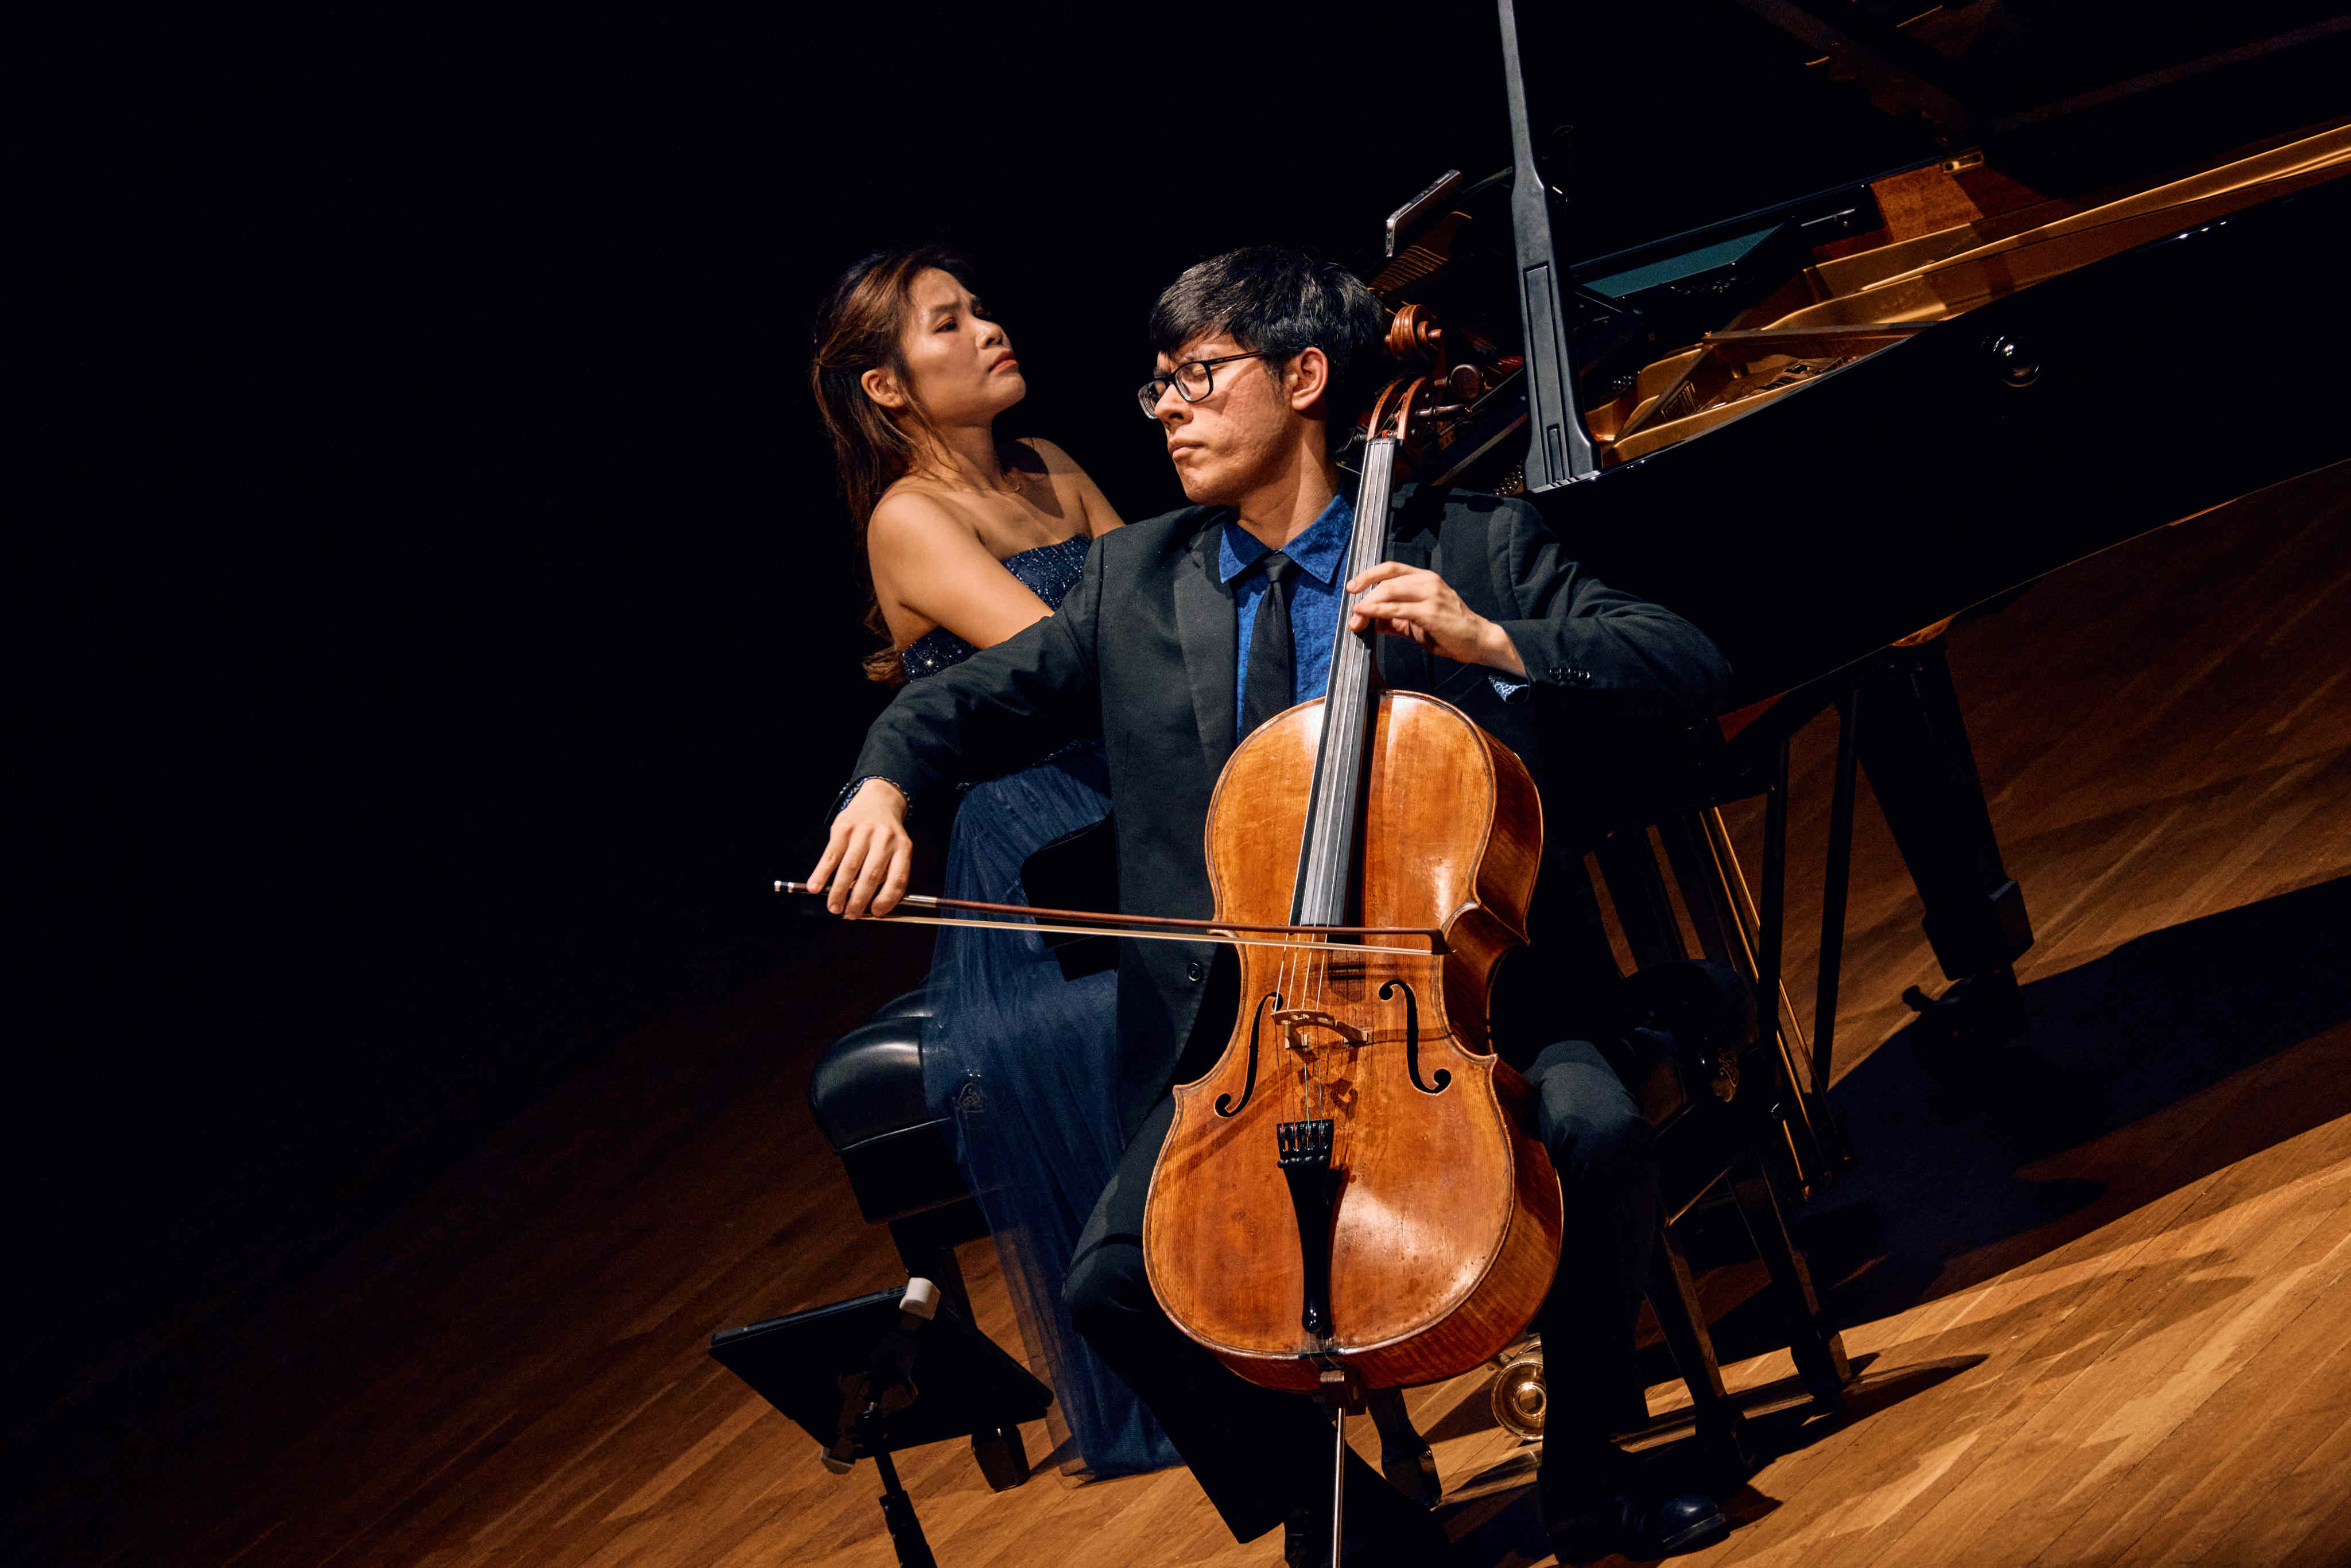 Bulgarian-Chinese cellist Zlatomir Fung in recital with Hong Kong pianist Rachel Cheung at Hong Kong City Hall on April 17, 2024. Both impressed in a concert marked by brilliant playing. Photo: Kenny Cheung/Premiere Performances of Hong Kong